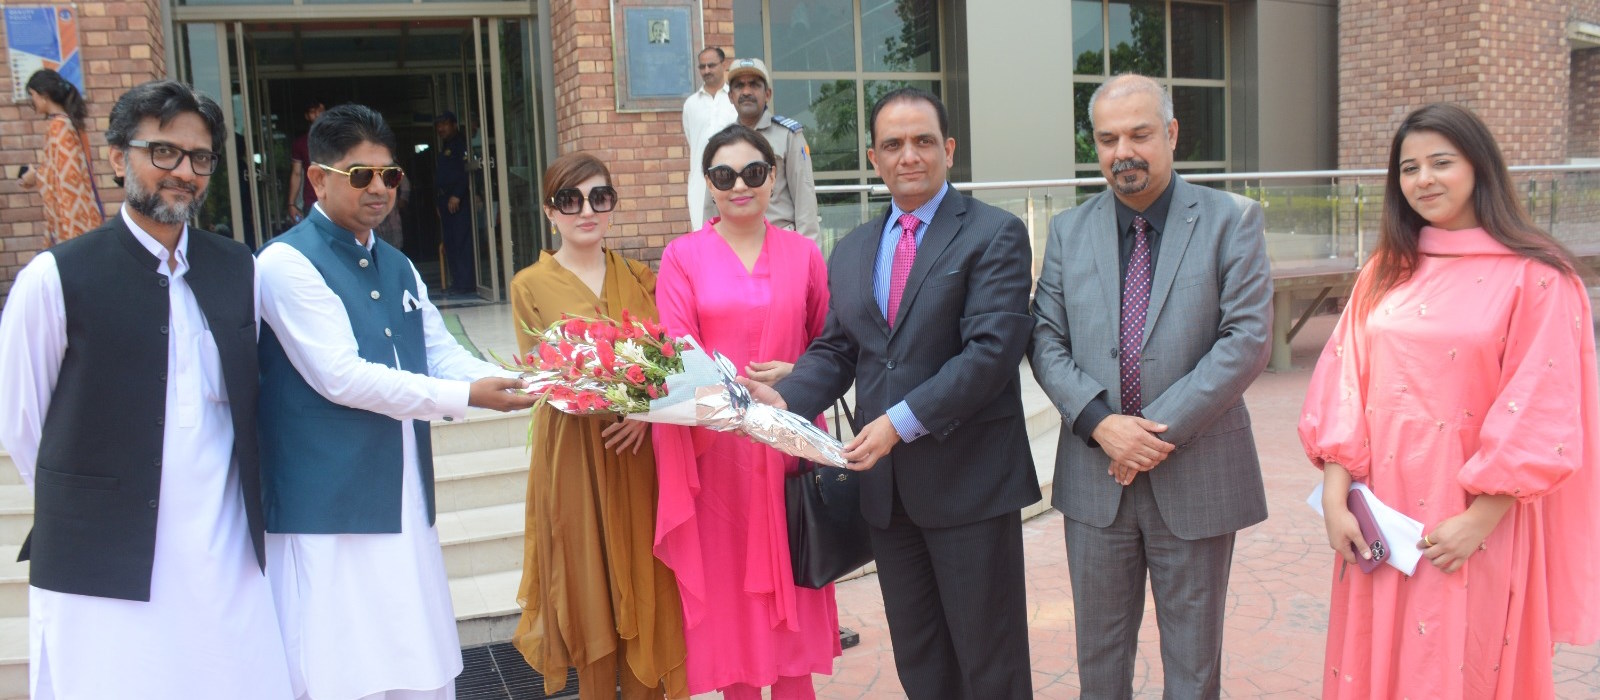 Dr. Saqib Gulzar, Dean Management Sciences and Humanities, with Dr. Inayat Kalim, Head department of Humanities, receiving Ms. Mashaal Mullick, Special Assistant to the PM on Human Rights and Women Empowerment at Pehchan Pakistan Conference at CUI